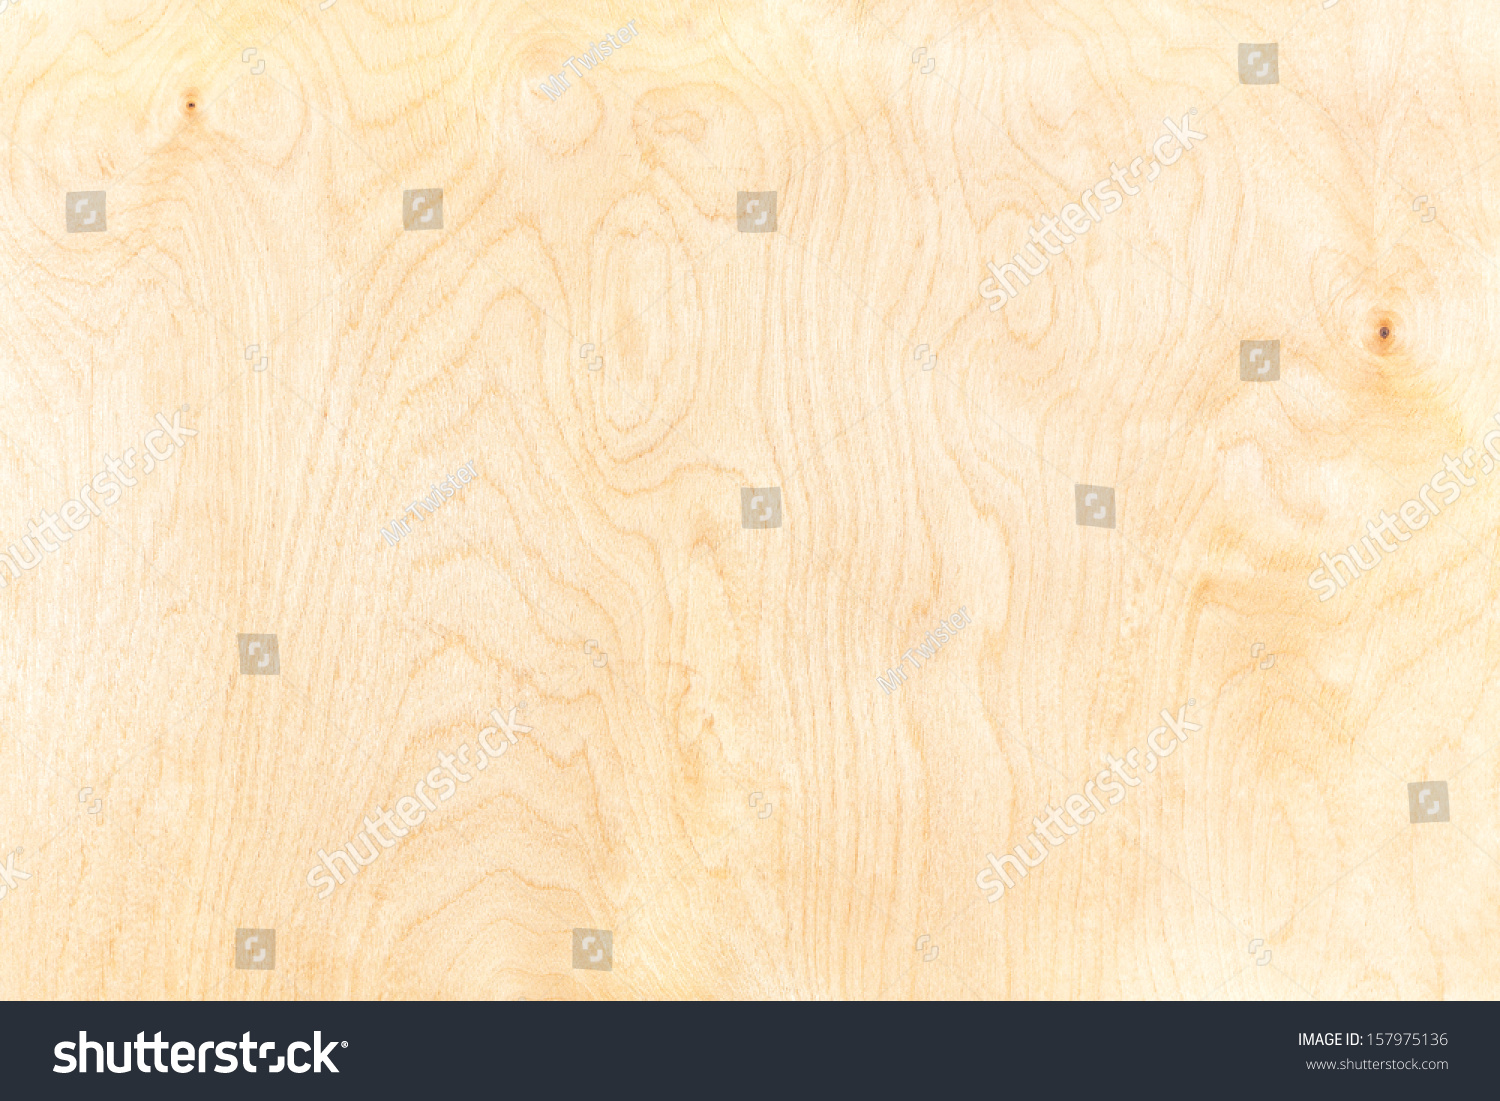 Birch plywood. High-detailed wood texture series. #157975136